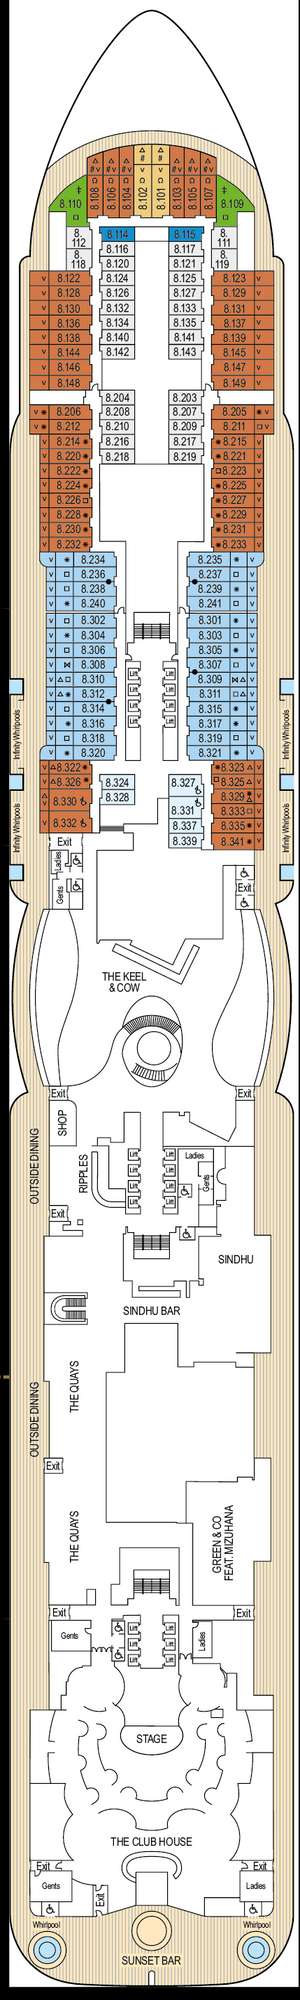 Deck plan for Arvia